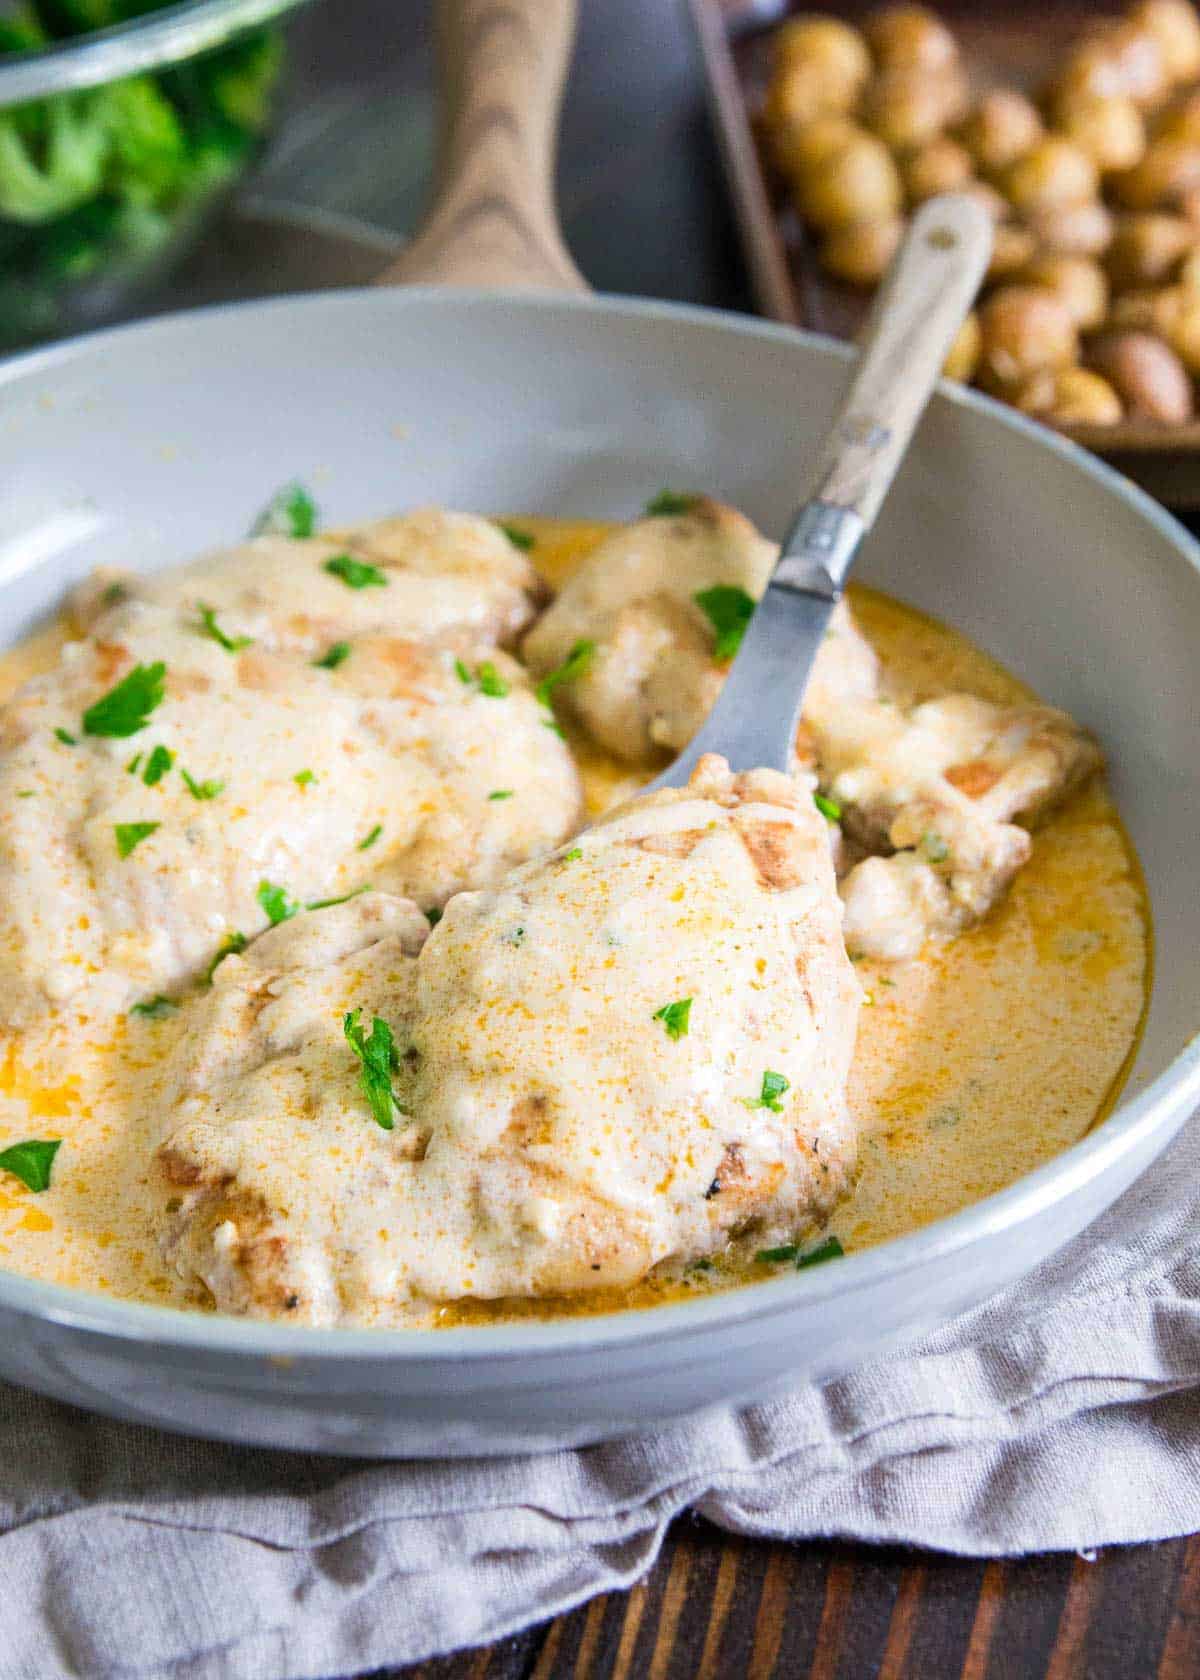 This cream cheese chicken is your answer to boring weeknight meals! Seasoned with 5 flavor-packed spices, it's creamy, indulgent & full of savory goodness.